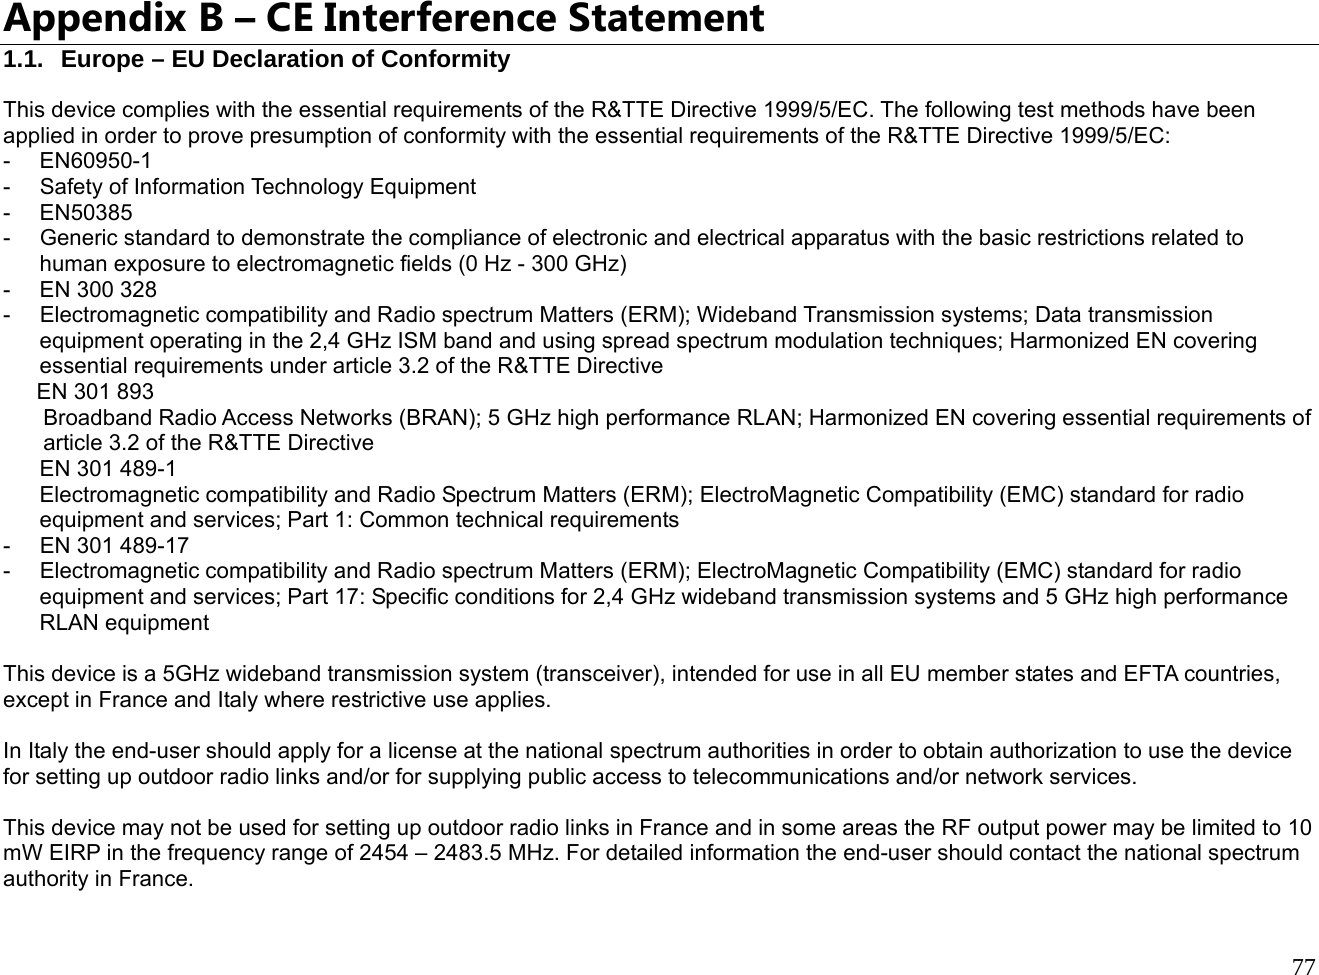  77  Appendix B – CE Interference Statement 1.1.  Europe – EU Declaration of Conformity This device complies with the essential requirements of the R&amp;TTE Directive 1999/5/EC. The following test methods have been applied in order to prove presumption of conformity with the essential requirements of the R&amp;TTE Directive 1999/5/EC: - EN60950-1 - Safety of Information Technology Equipment - EN50385 -  Generic standard to demonstrate the compliance of electronic and electrical apparatus with the basic restrictions related to human exposure to electromagnetic fields (0 Hz - 300 GHz) - EN 300 328 - Electromagnetic compatibility and Radio spectrum Matters (ERM); Wideband Transmission systems; Data transmission equipment operating in the 2,4 GHz ISM band and using spread spectrum modulation techniques; Harmonized EN covering essential requirements under article 3.2 of the R&amp;TTE Directive EN 301 893  Broadband Radio Access Networks (BRAN); 5 GHz high performance RLAN; Harmonized EN covering essential requirements of article 3.2 of the R&amp;TTE Directive EN 301 489-1  Electromagnetic compatibility and Radio Spectrum Matters (ERM); ElectroMagnetic Compatibility (EMC) standard for radio equipment and services; Part 1: Common technical requirements - EN 301 489-17 - Electromagnetic compatibility and Radio spectrum Matters (ERM); ElectroMagnetic Compatibility (EMC) standard for radio equipment and services; Part 17: Specific conditions for 2,4 GHz wideband transmission systems and 5 GHz high performance RLAN equipment  This device is a 5GHz wideband transmission system (transceiver), intended for use in all EU member states and EFTA countries, except in France and Italy where restrictive use applies.  In Italy the end-user should apply for a license at the national spectrum authorities in order to obtain authorization to use the device for setting up outdoor radio links and/or for supplying public access to telecommunications and/or network services.  This device may not be used for setting up outdoor radio links in France and in some areas the RF output power may be limited to 10 mW EIRP in the frequency range of 2454 – 2483.5 MHz. For detailed information the end-user should contact the national spectrum authority in France. 